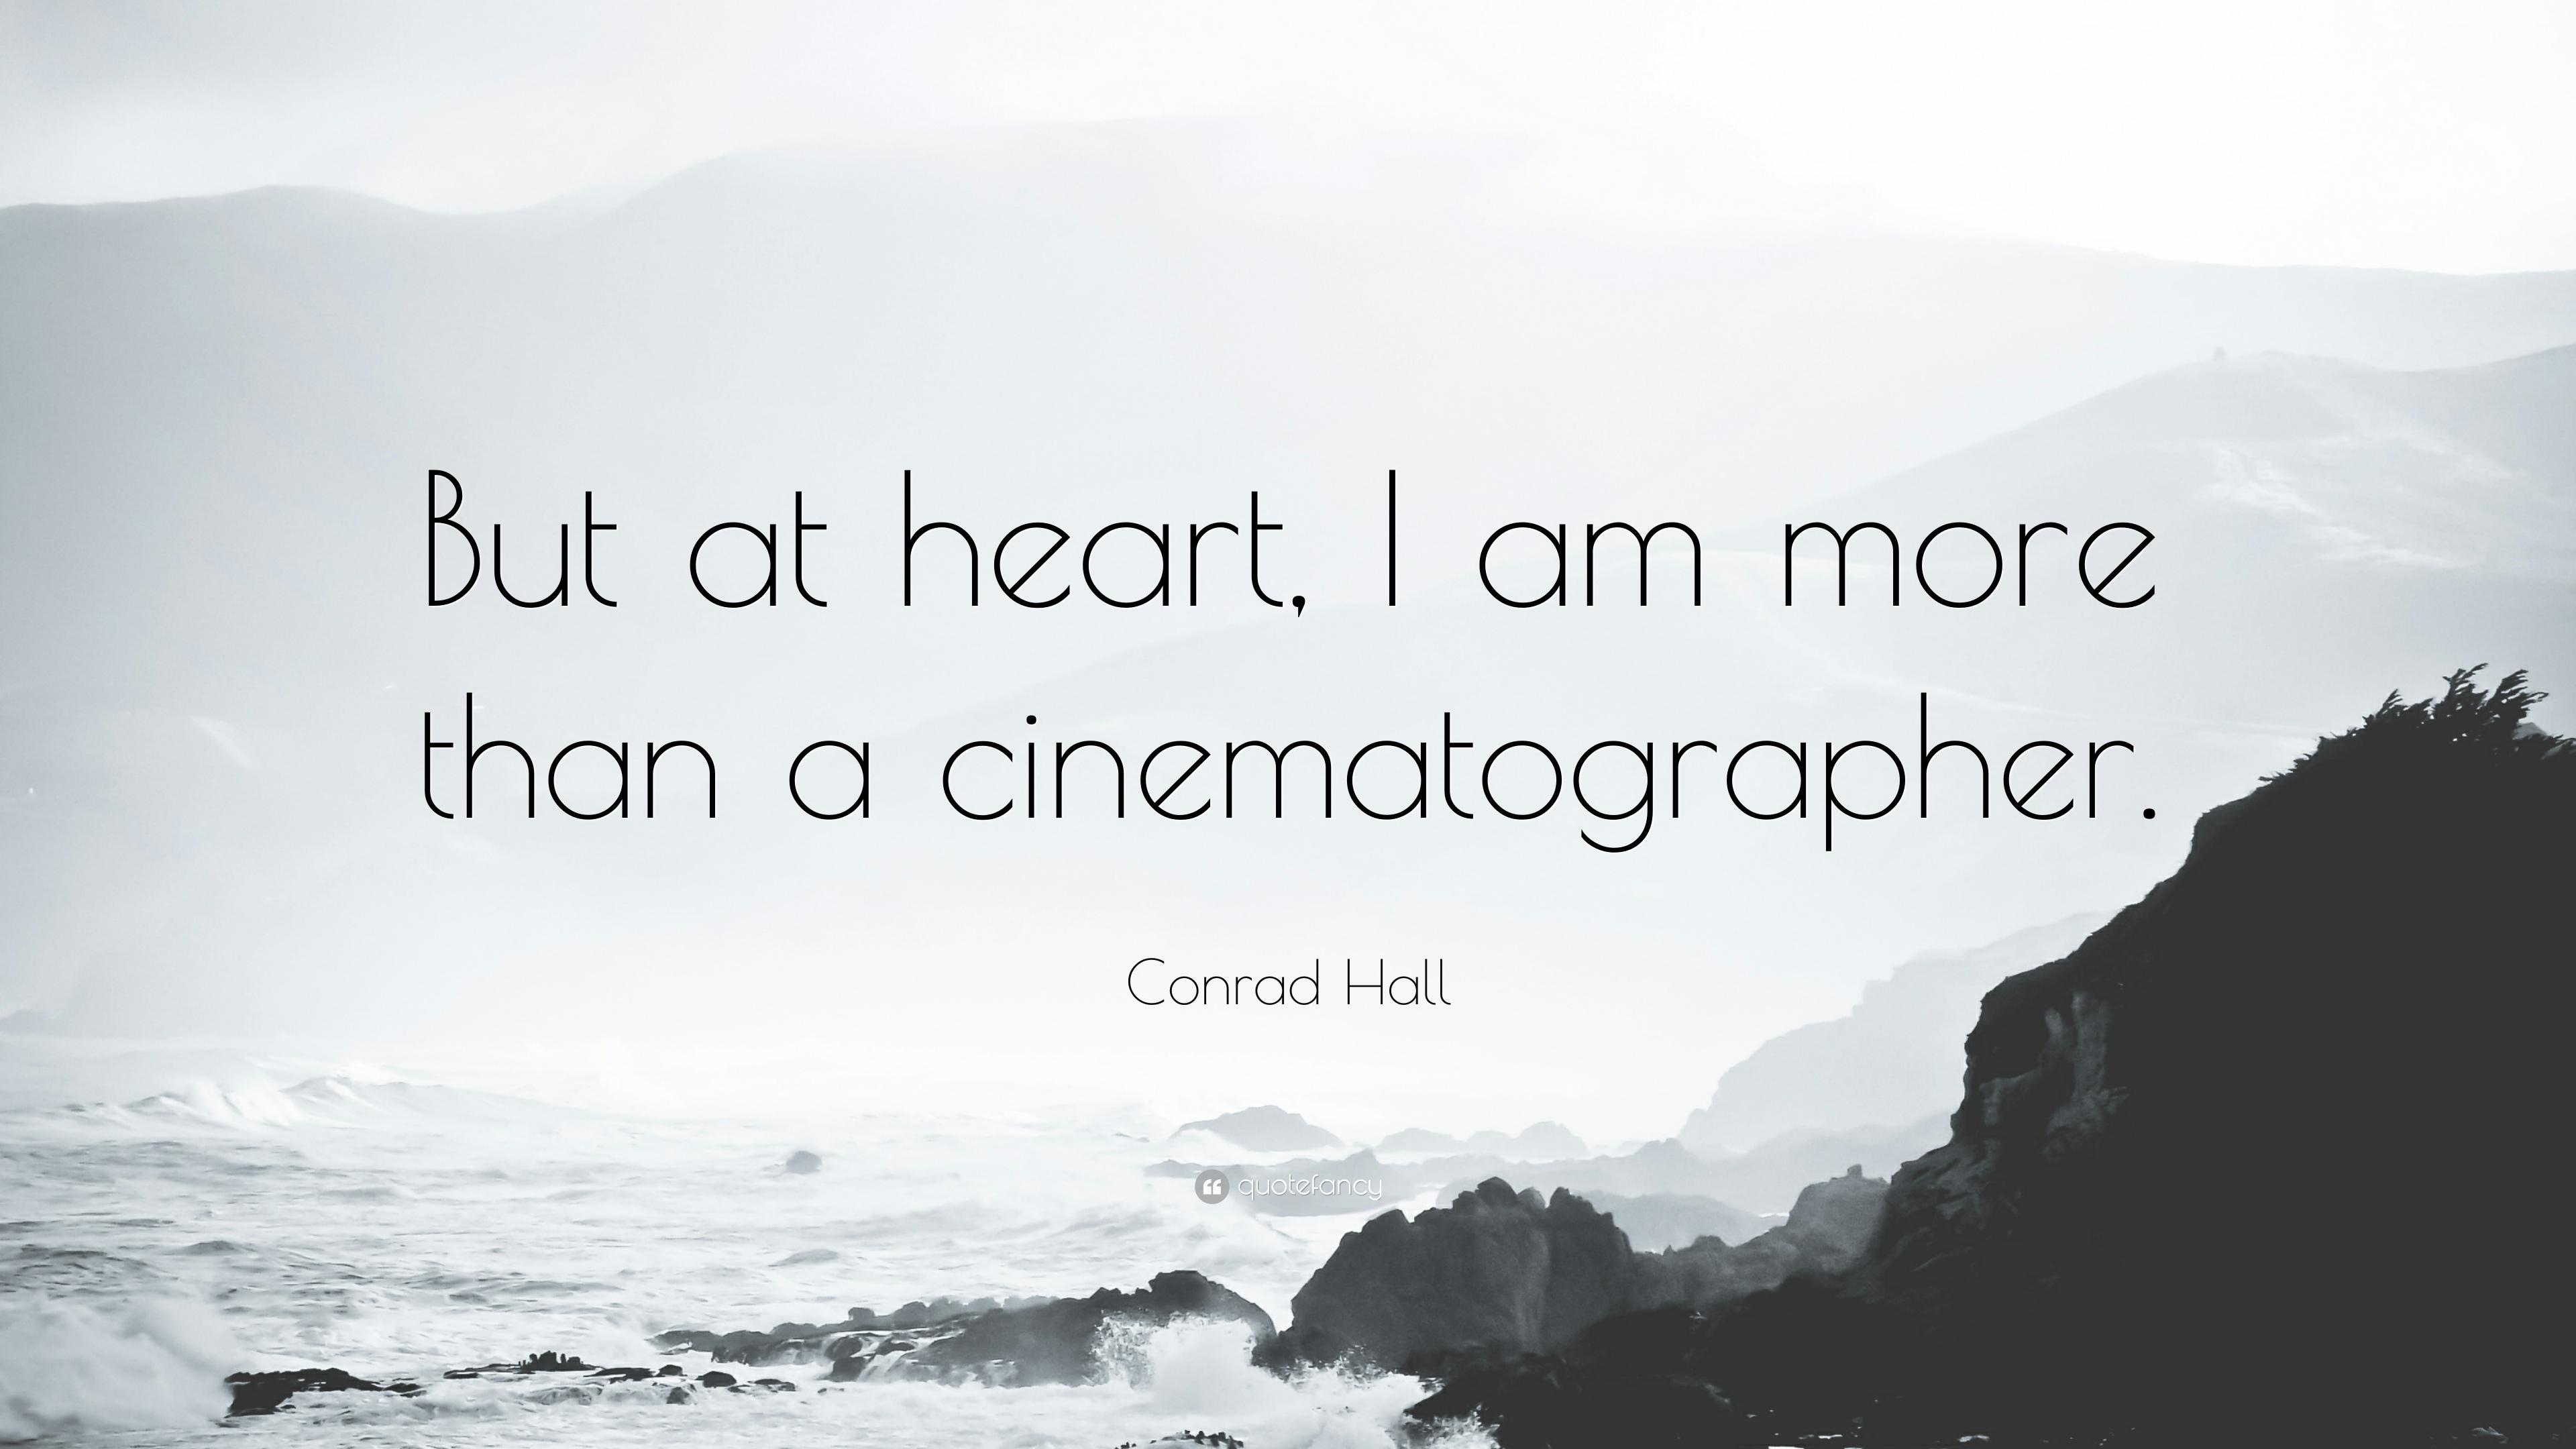 Conrad Hall Quote: “But at heart, I am more than a